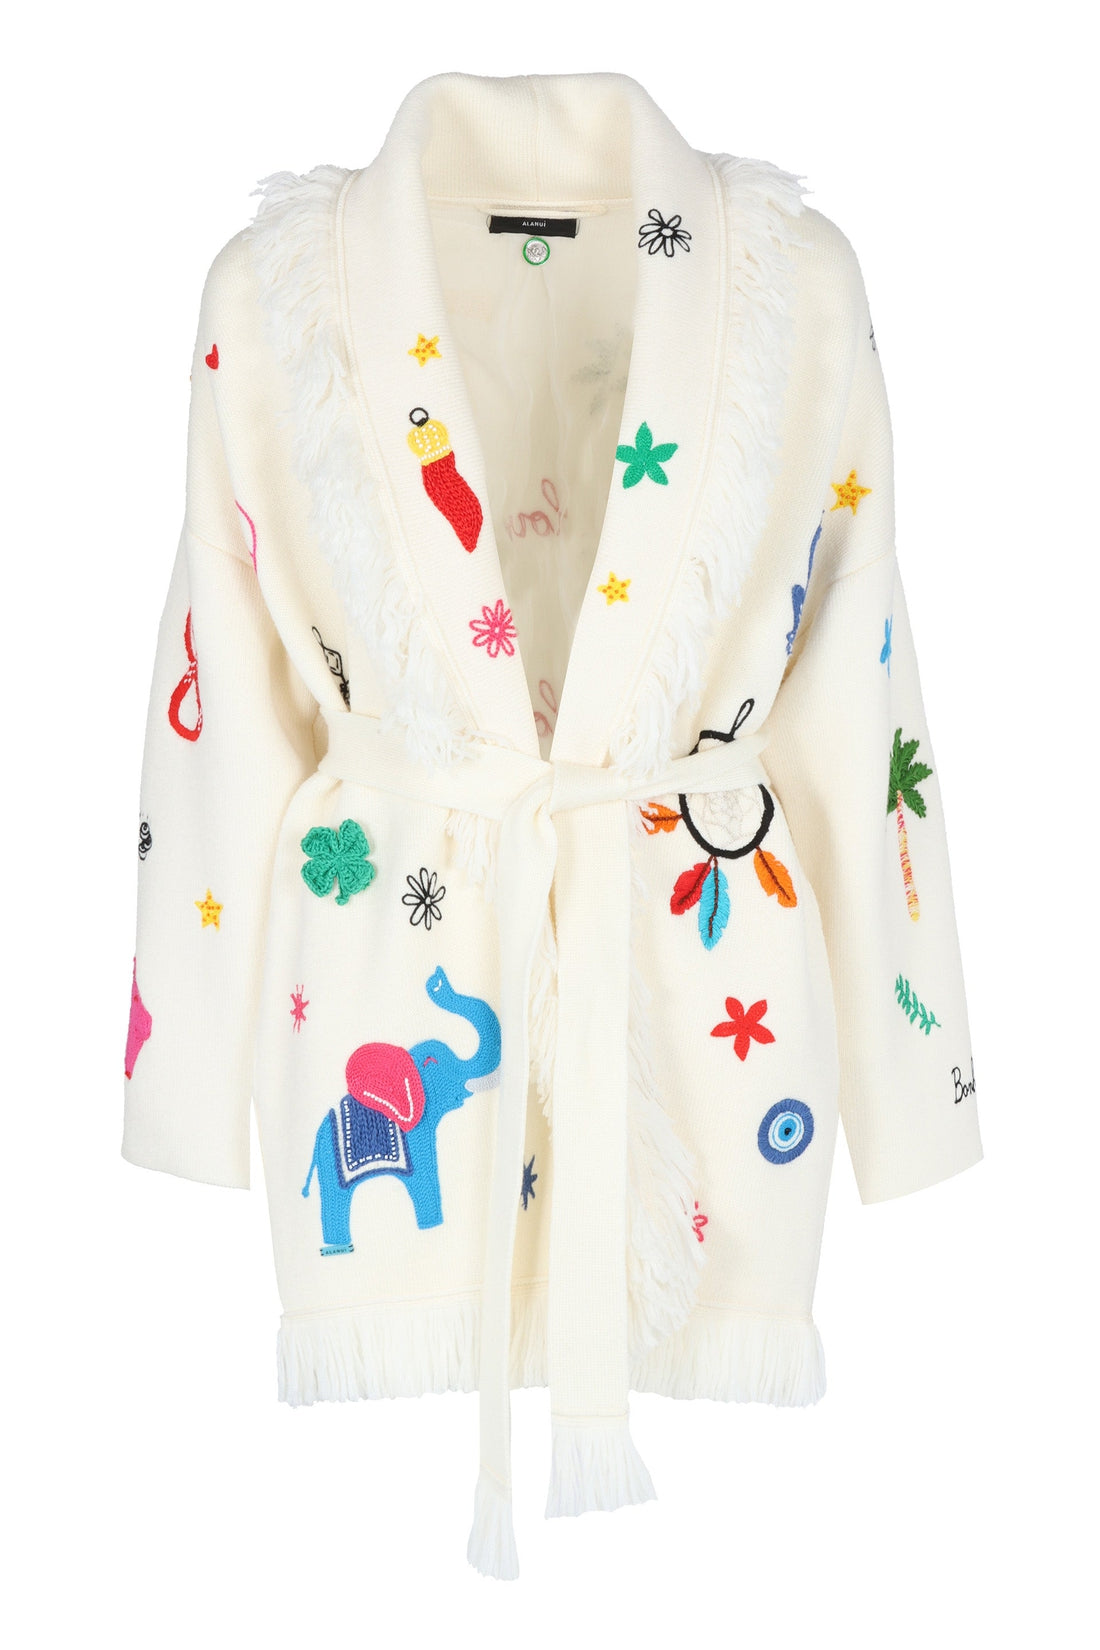 Alanui-OUTLET-SALE-Lucky Charm embroidered cardigan-ARCHIVIST